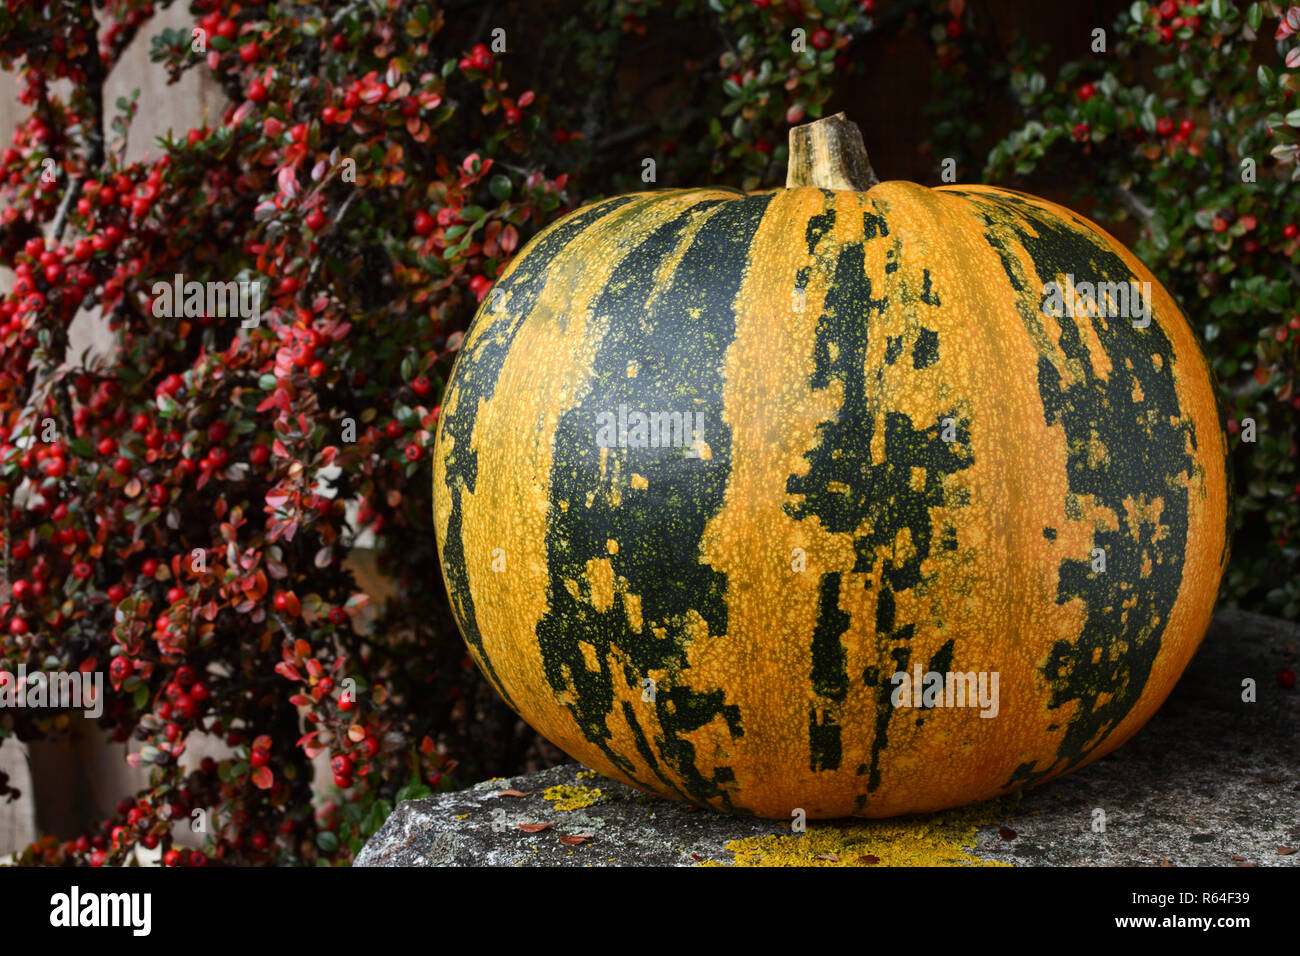 Large pumpkin with stripes, surrounded by fall berries Stock Photo